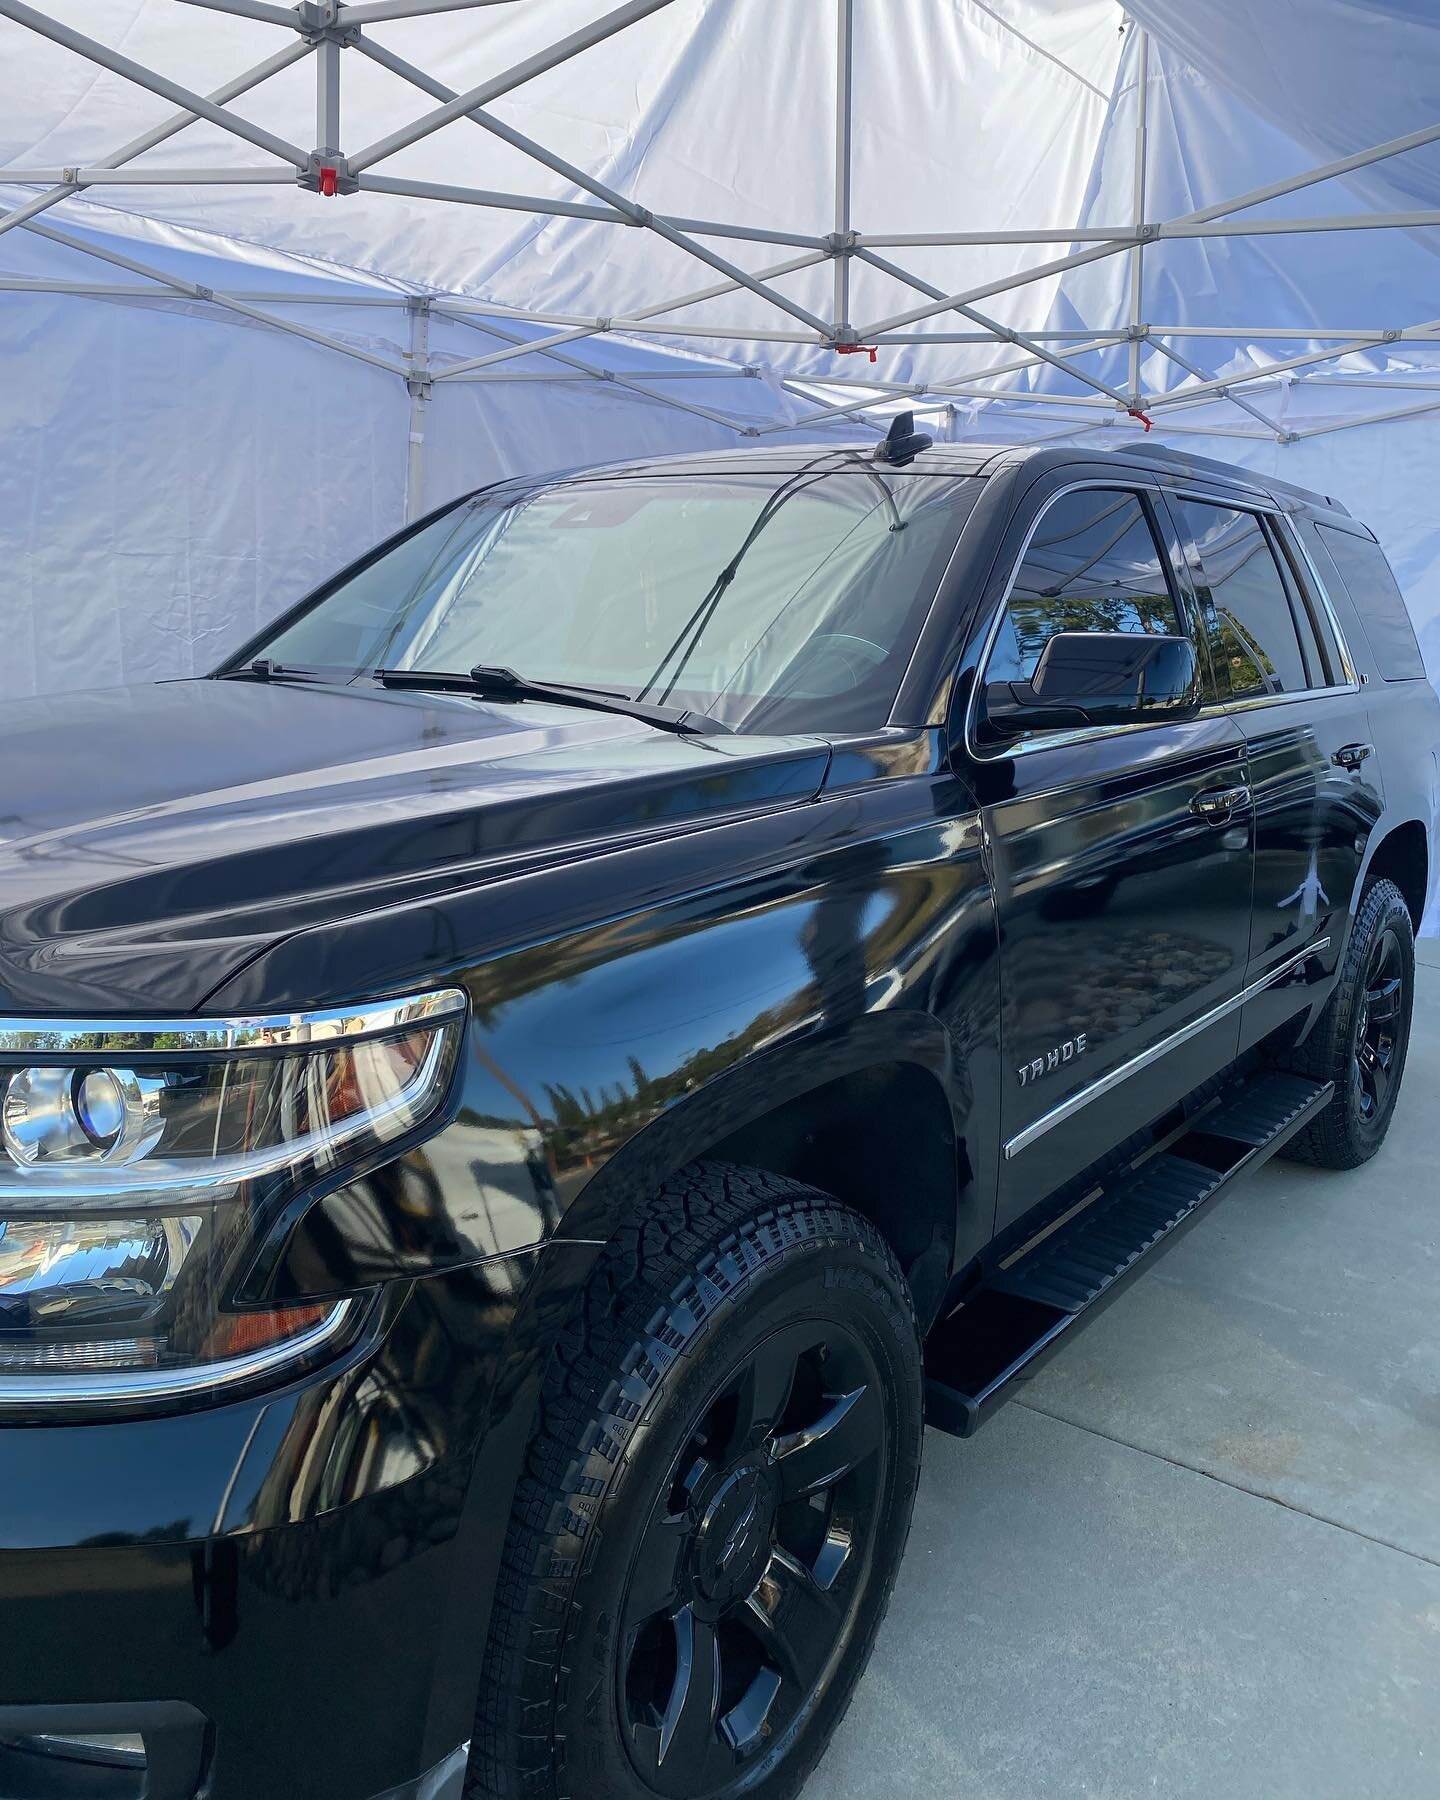 5 year ceramic coating installation in an enclosed 10&rsquo; x 20&rsquo; canopy structure for contaminant-free mobile ceramic installation! #ceramiccoating #mobiledetailing #sandiego #sandiegoliving